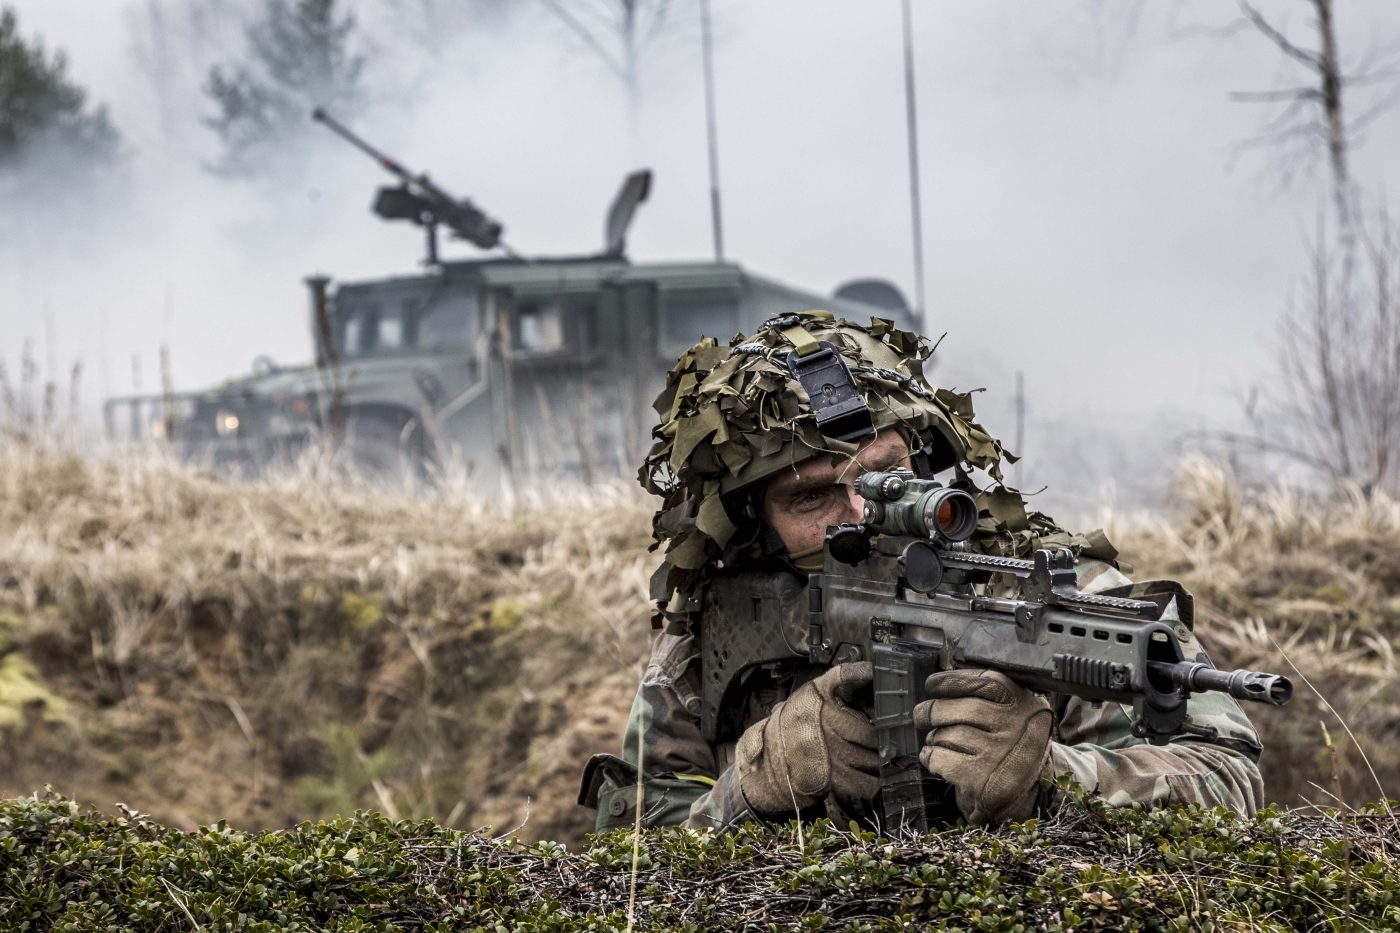 Photo: NATO Latvian soldier looks down the barrel of his weapon with a Humvee for protection in the background. Credit: Miks Užansfor NATO via Flickr. https://flic.kr/p/rda9VP